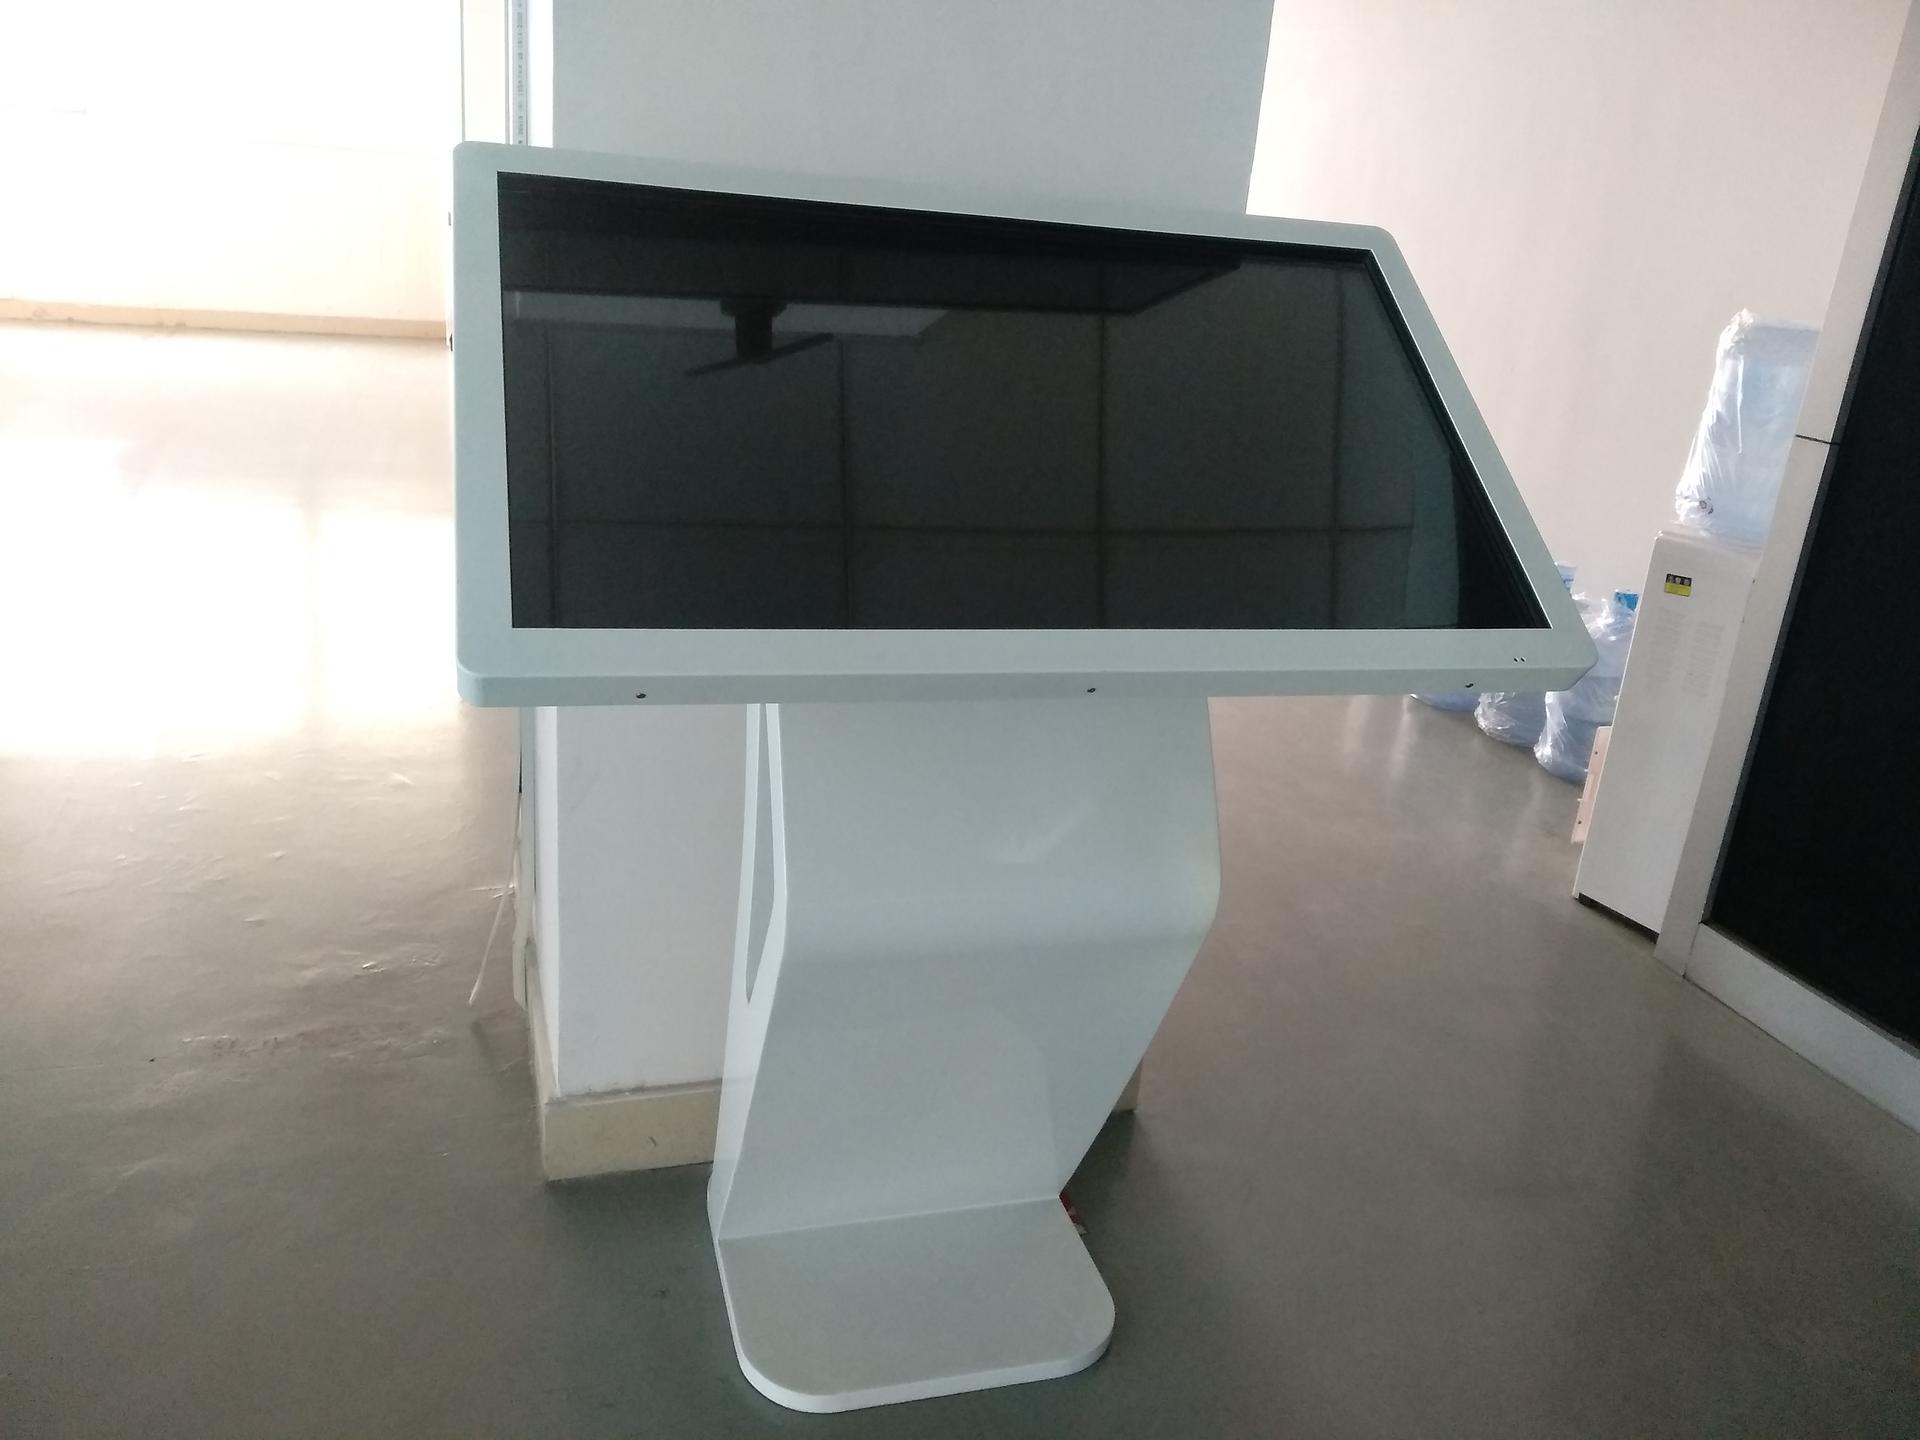 advertisement playing kiosk with clear and big LCD screen